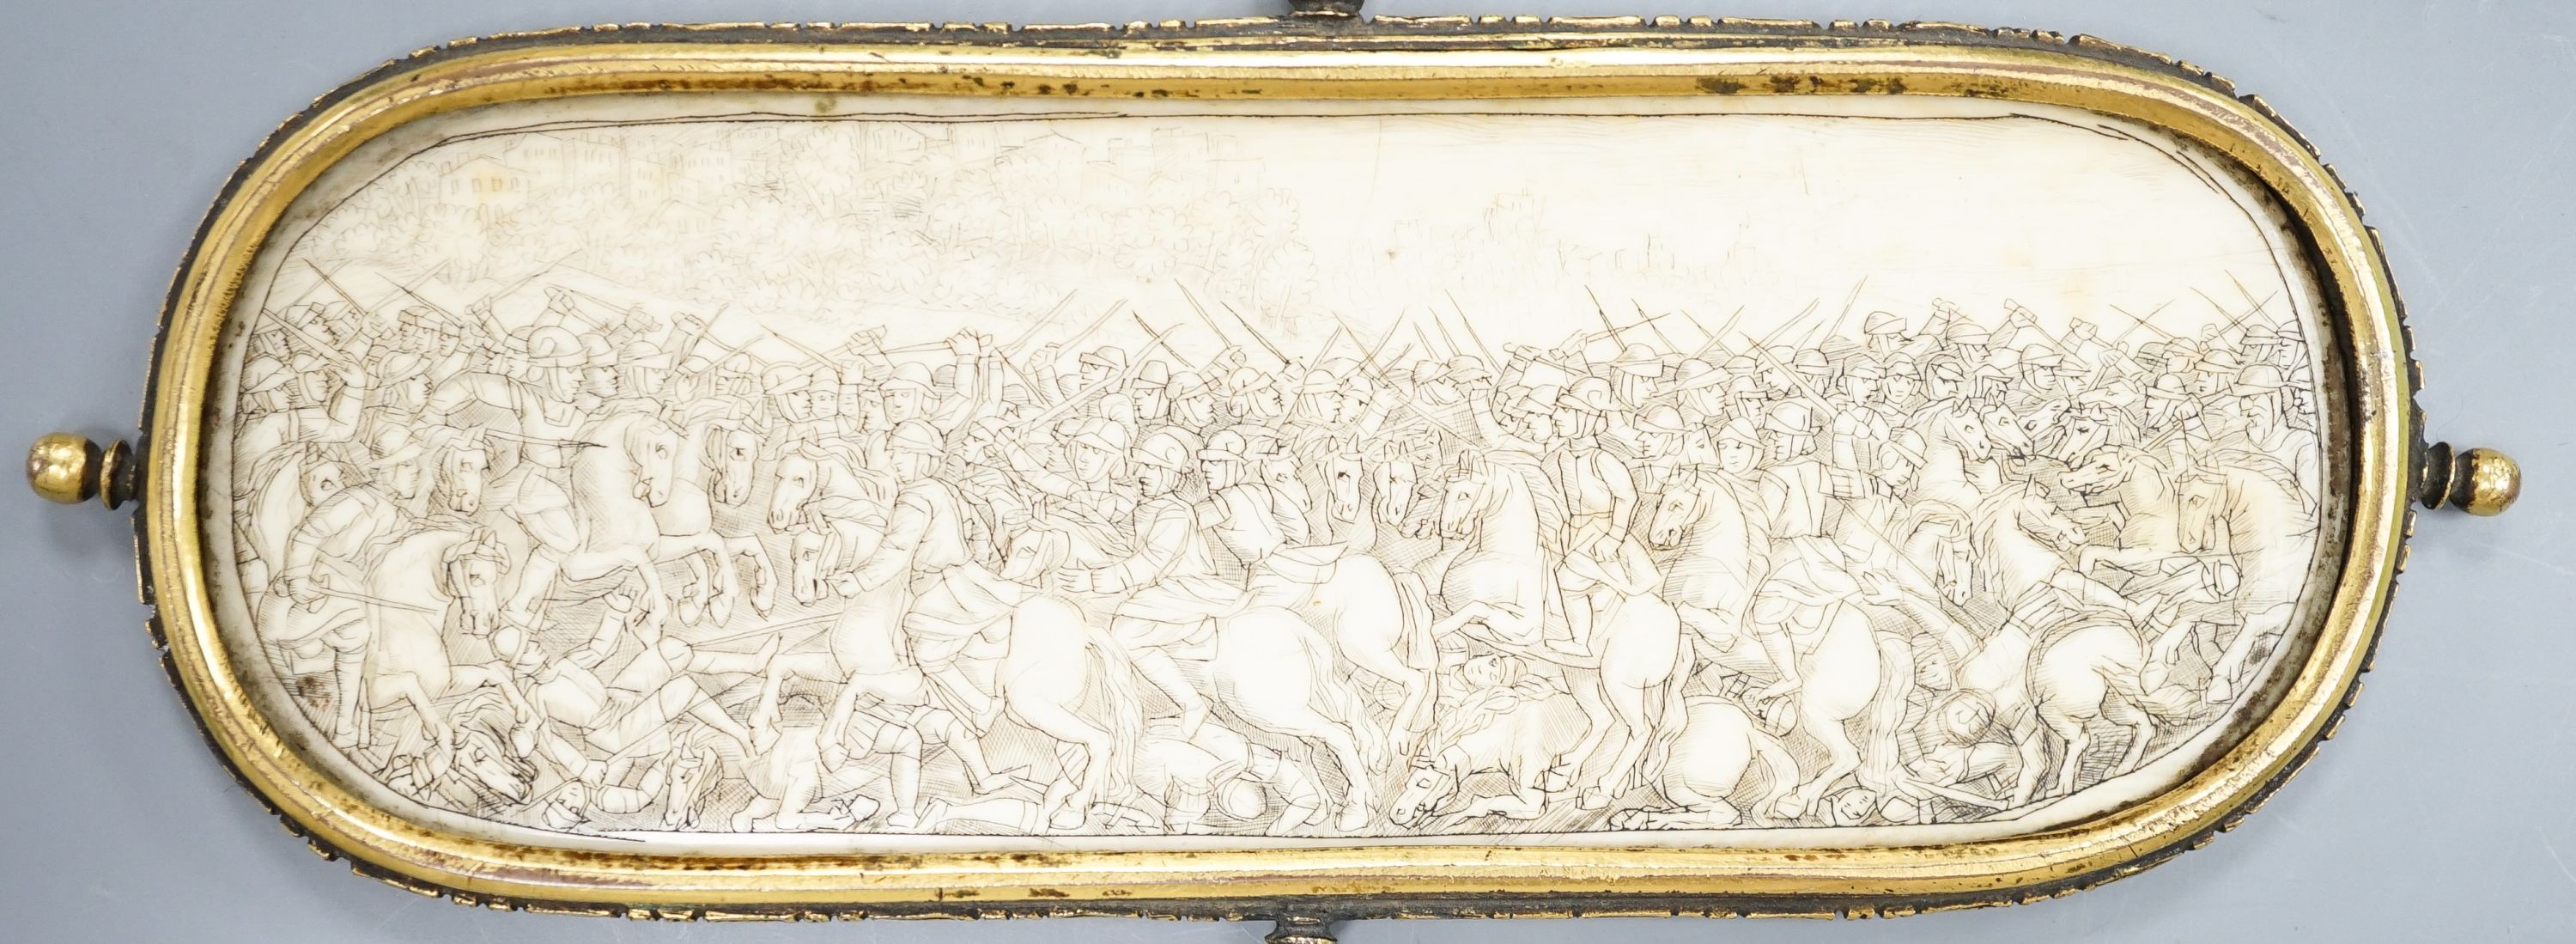 A 17th century French oval ivory plaque in a revolving metal surround, etched on both sides with battle scenes and ships in the background 17cm